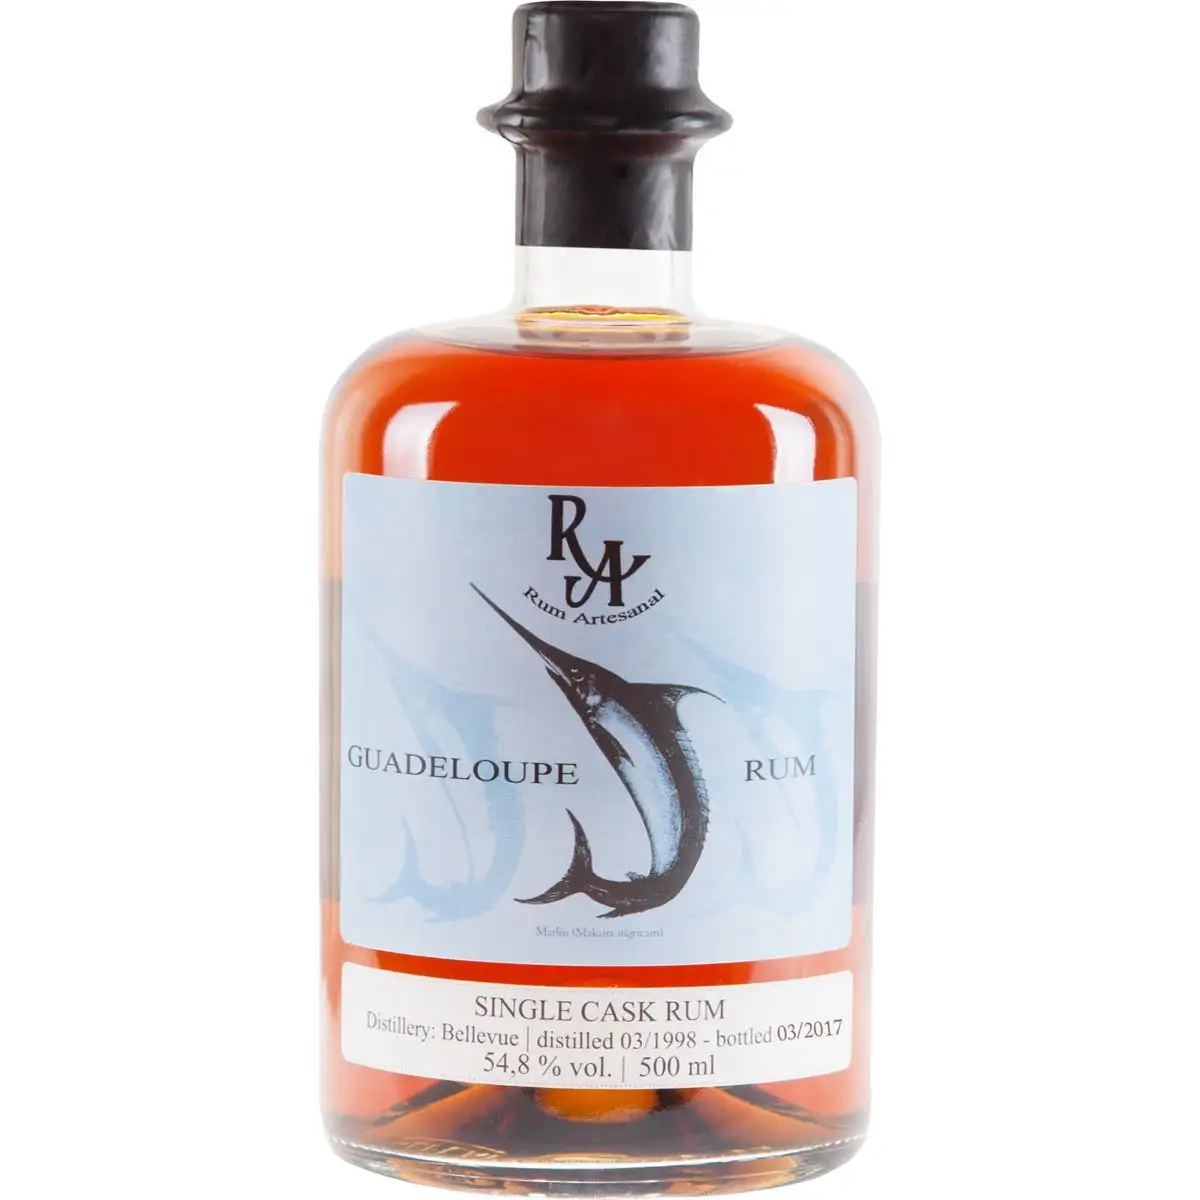 Image of the front of the bottle of the rum Rum Artesanal Guadeloupe Rum